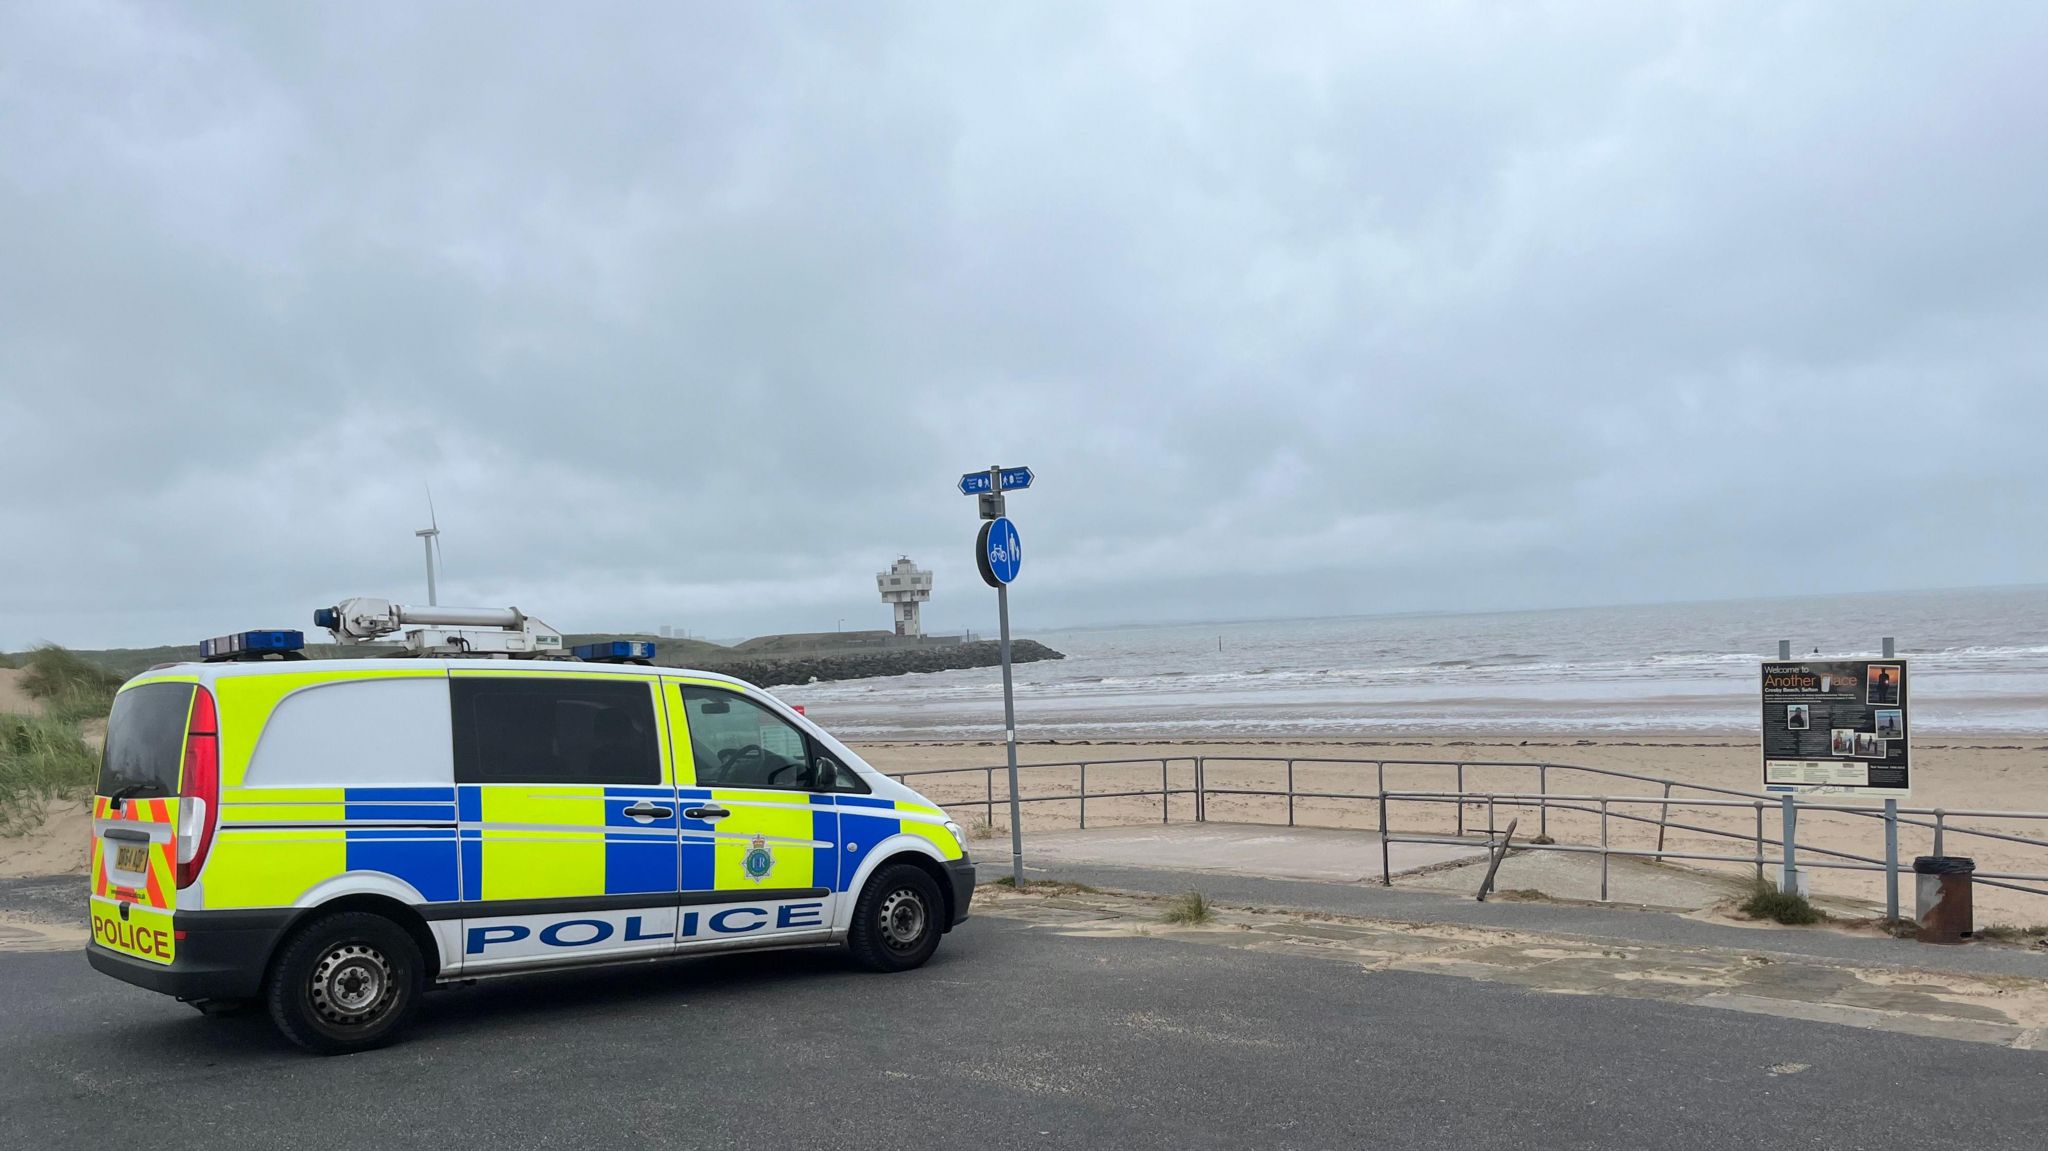 Police van parked at beach as emergency services search for missing teenager 